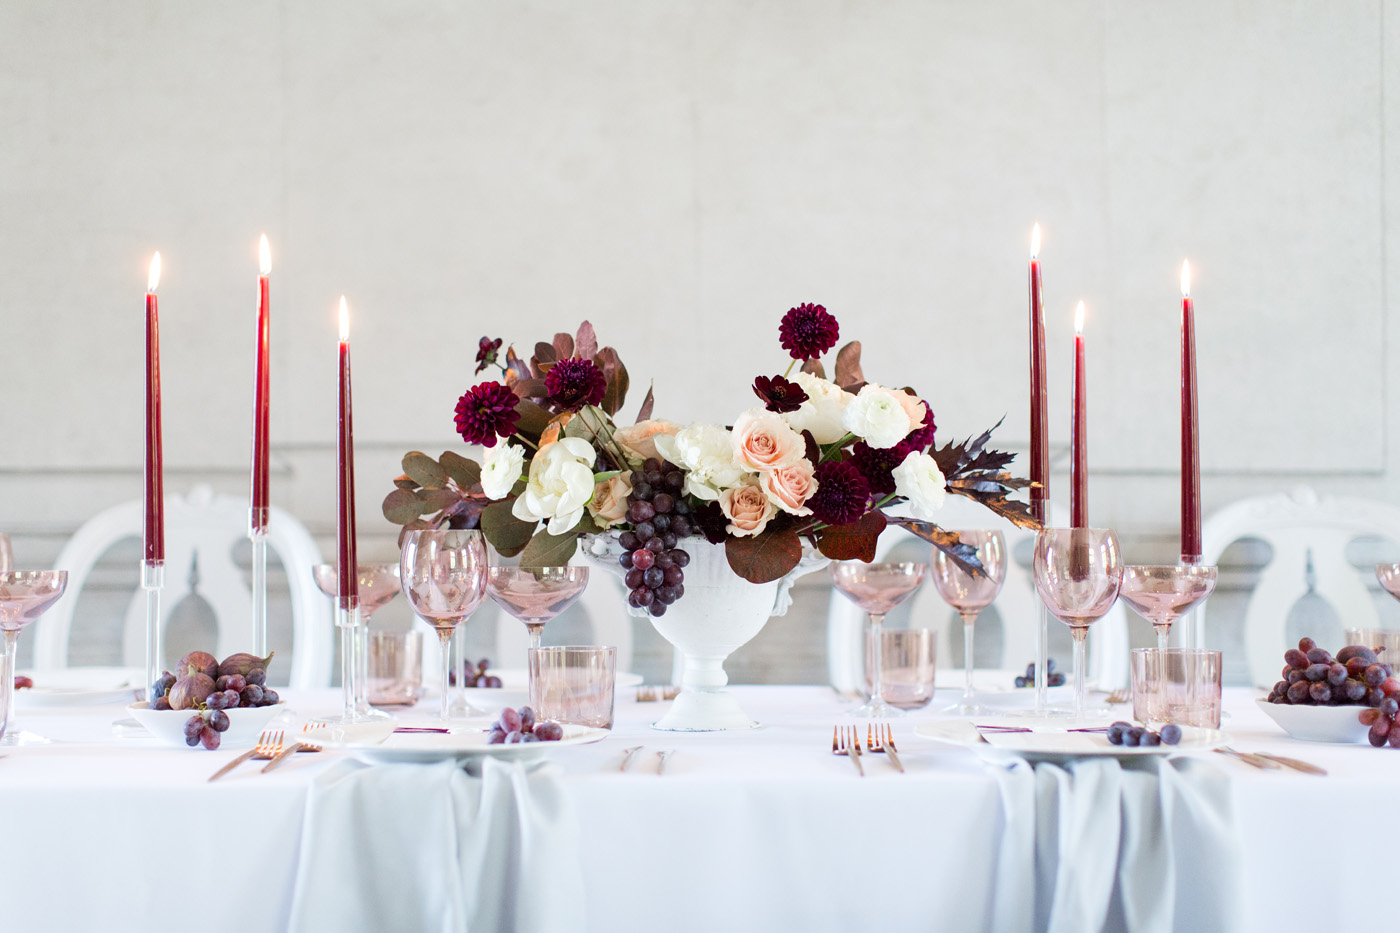 manor wedding reception table with white dior chairs and marsala candles